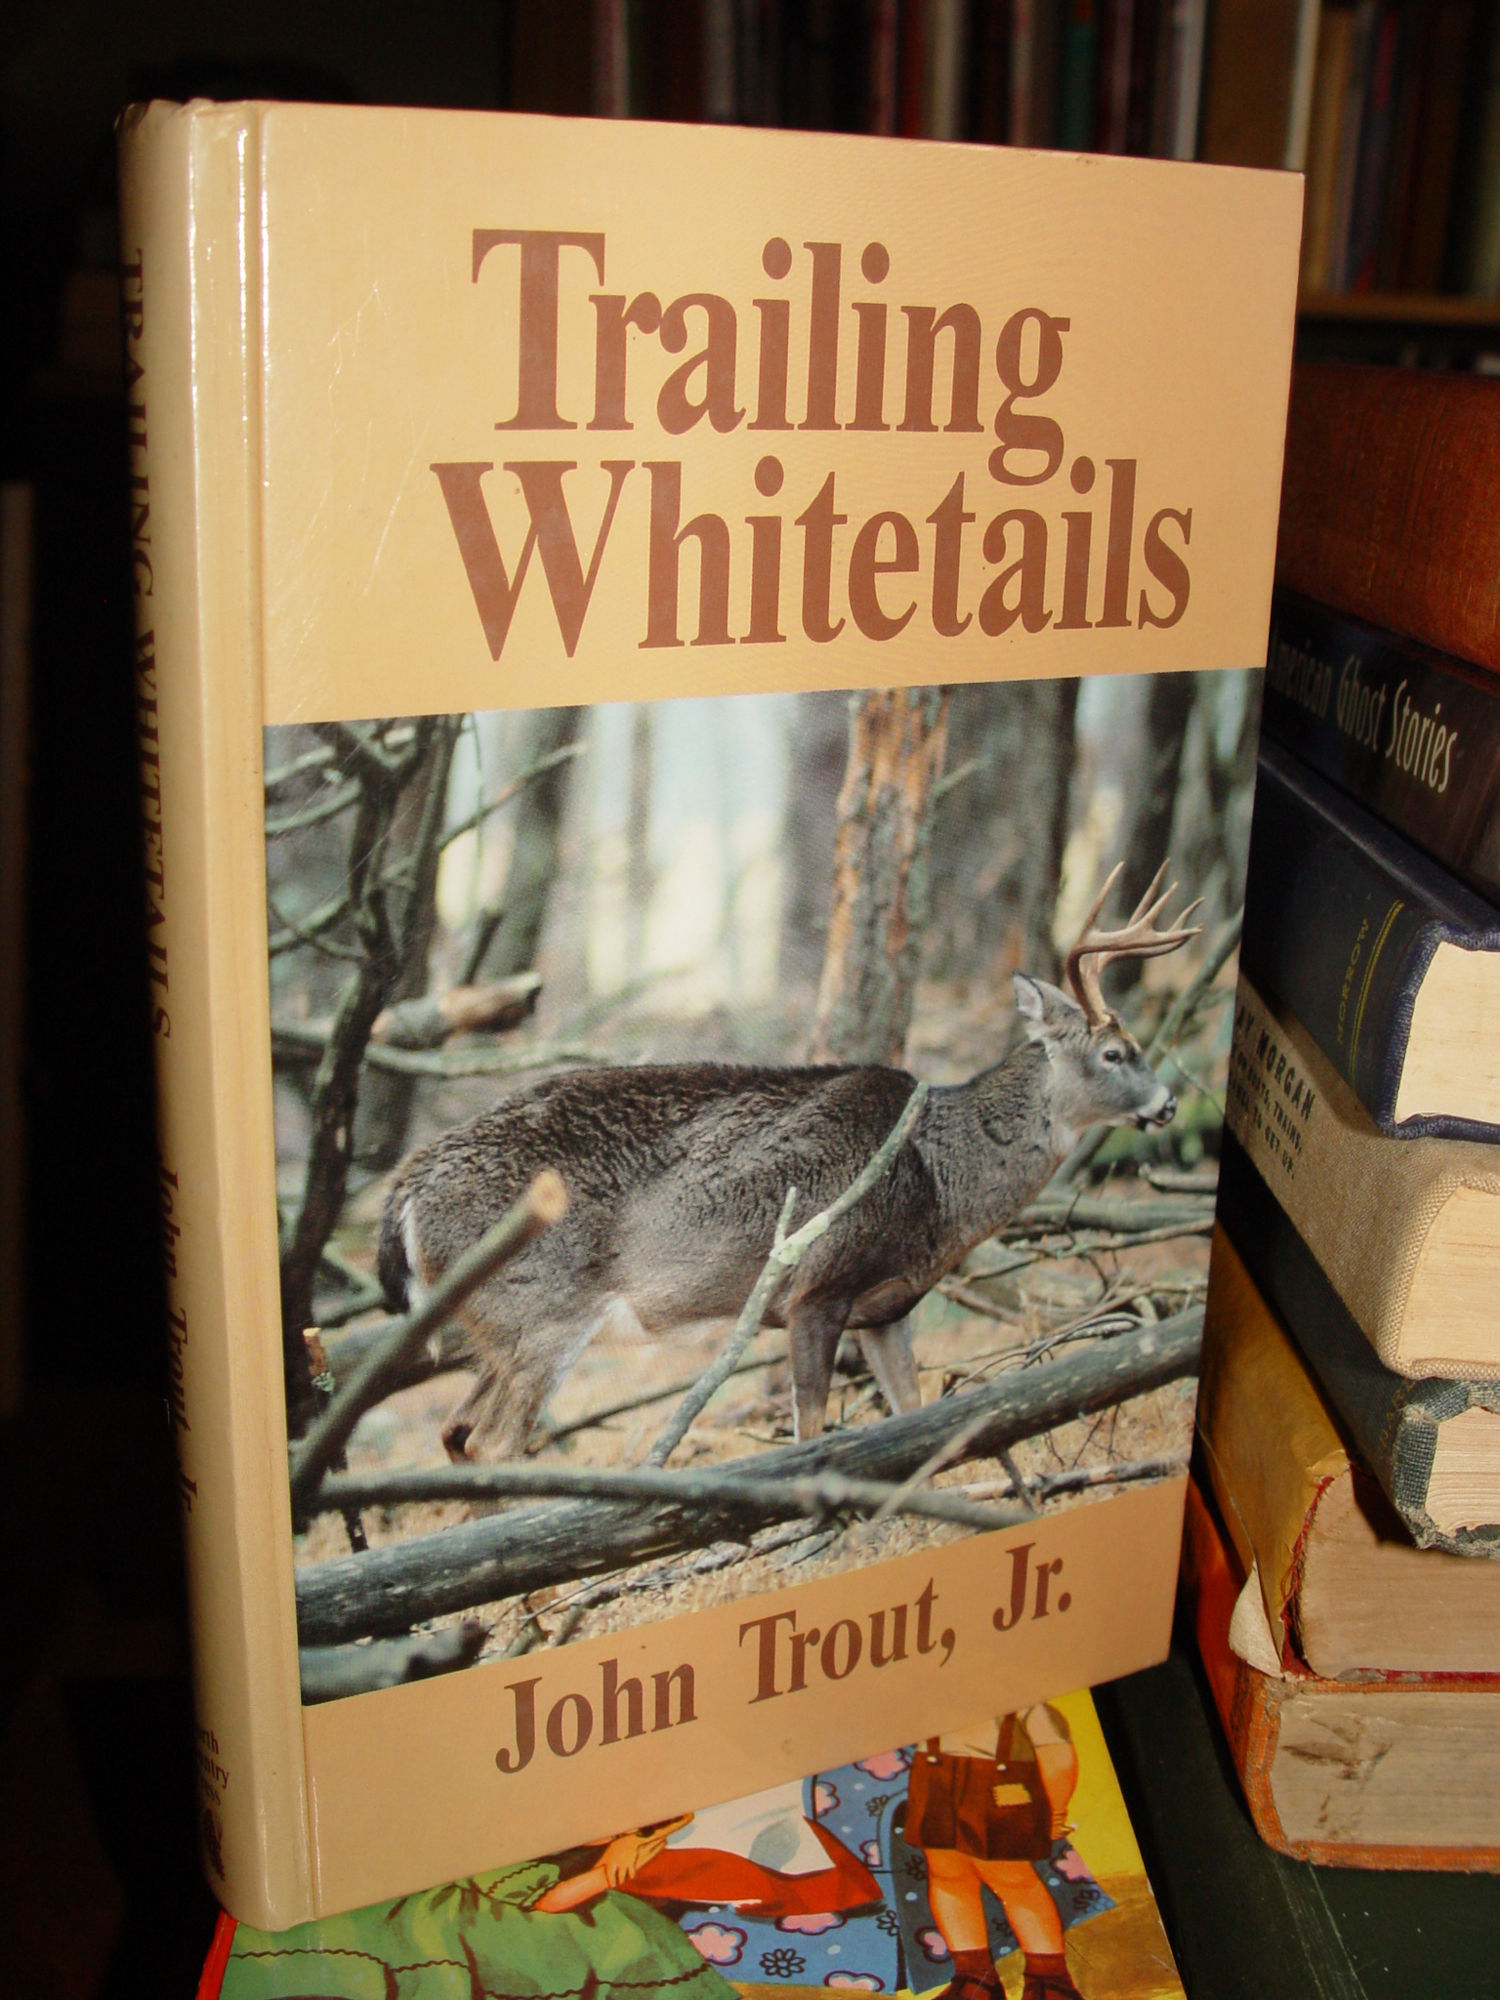 Trailing Whitetails by John Trout, Jr 1987